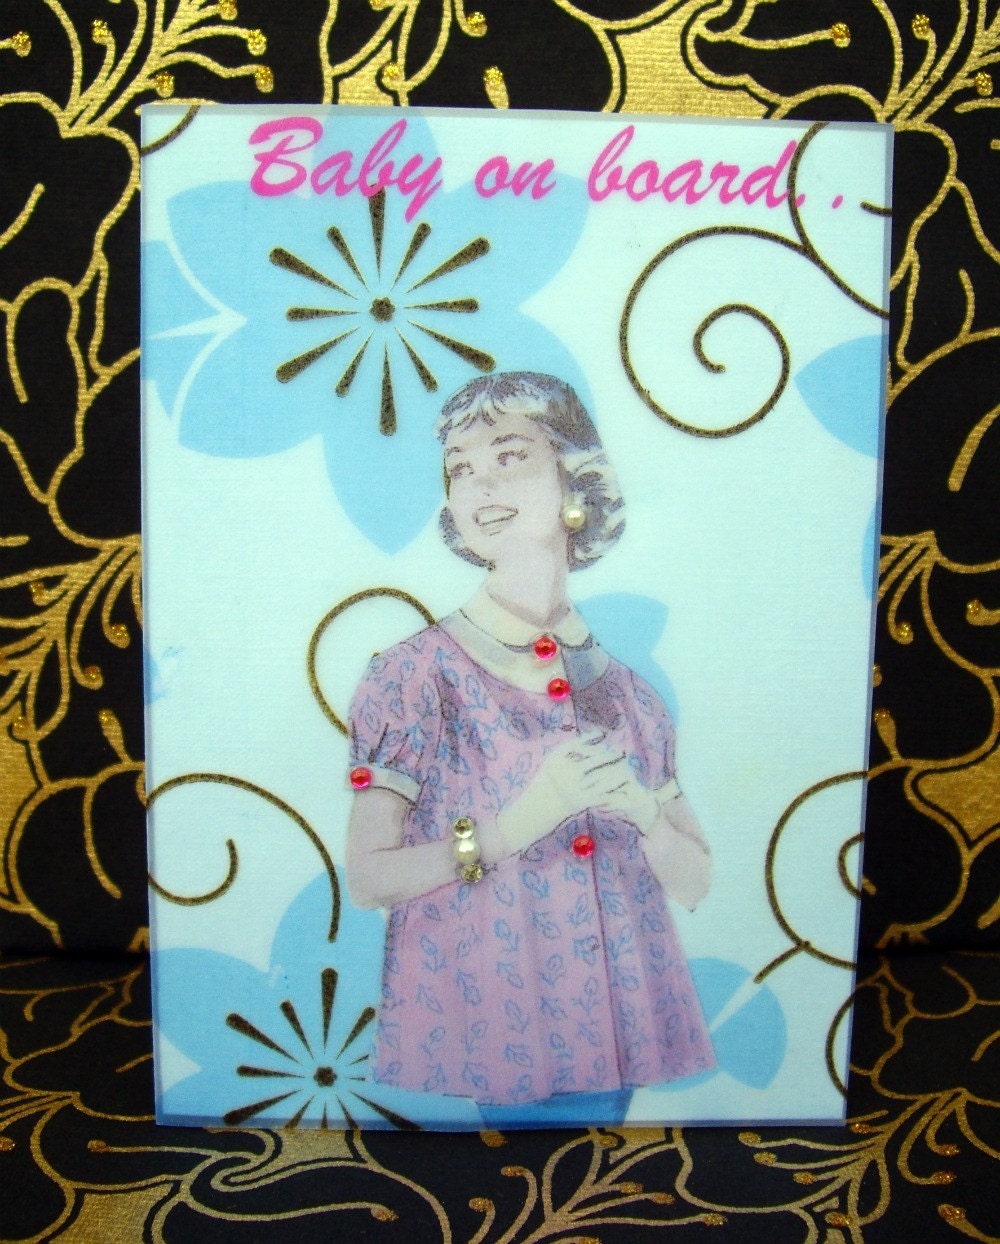 Betty Card / Baby on board / Vintage Printed Collection / Maternity 50s Glamour Girl / Handmade Greeting Card